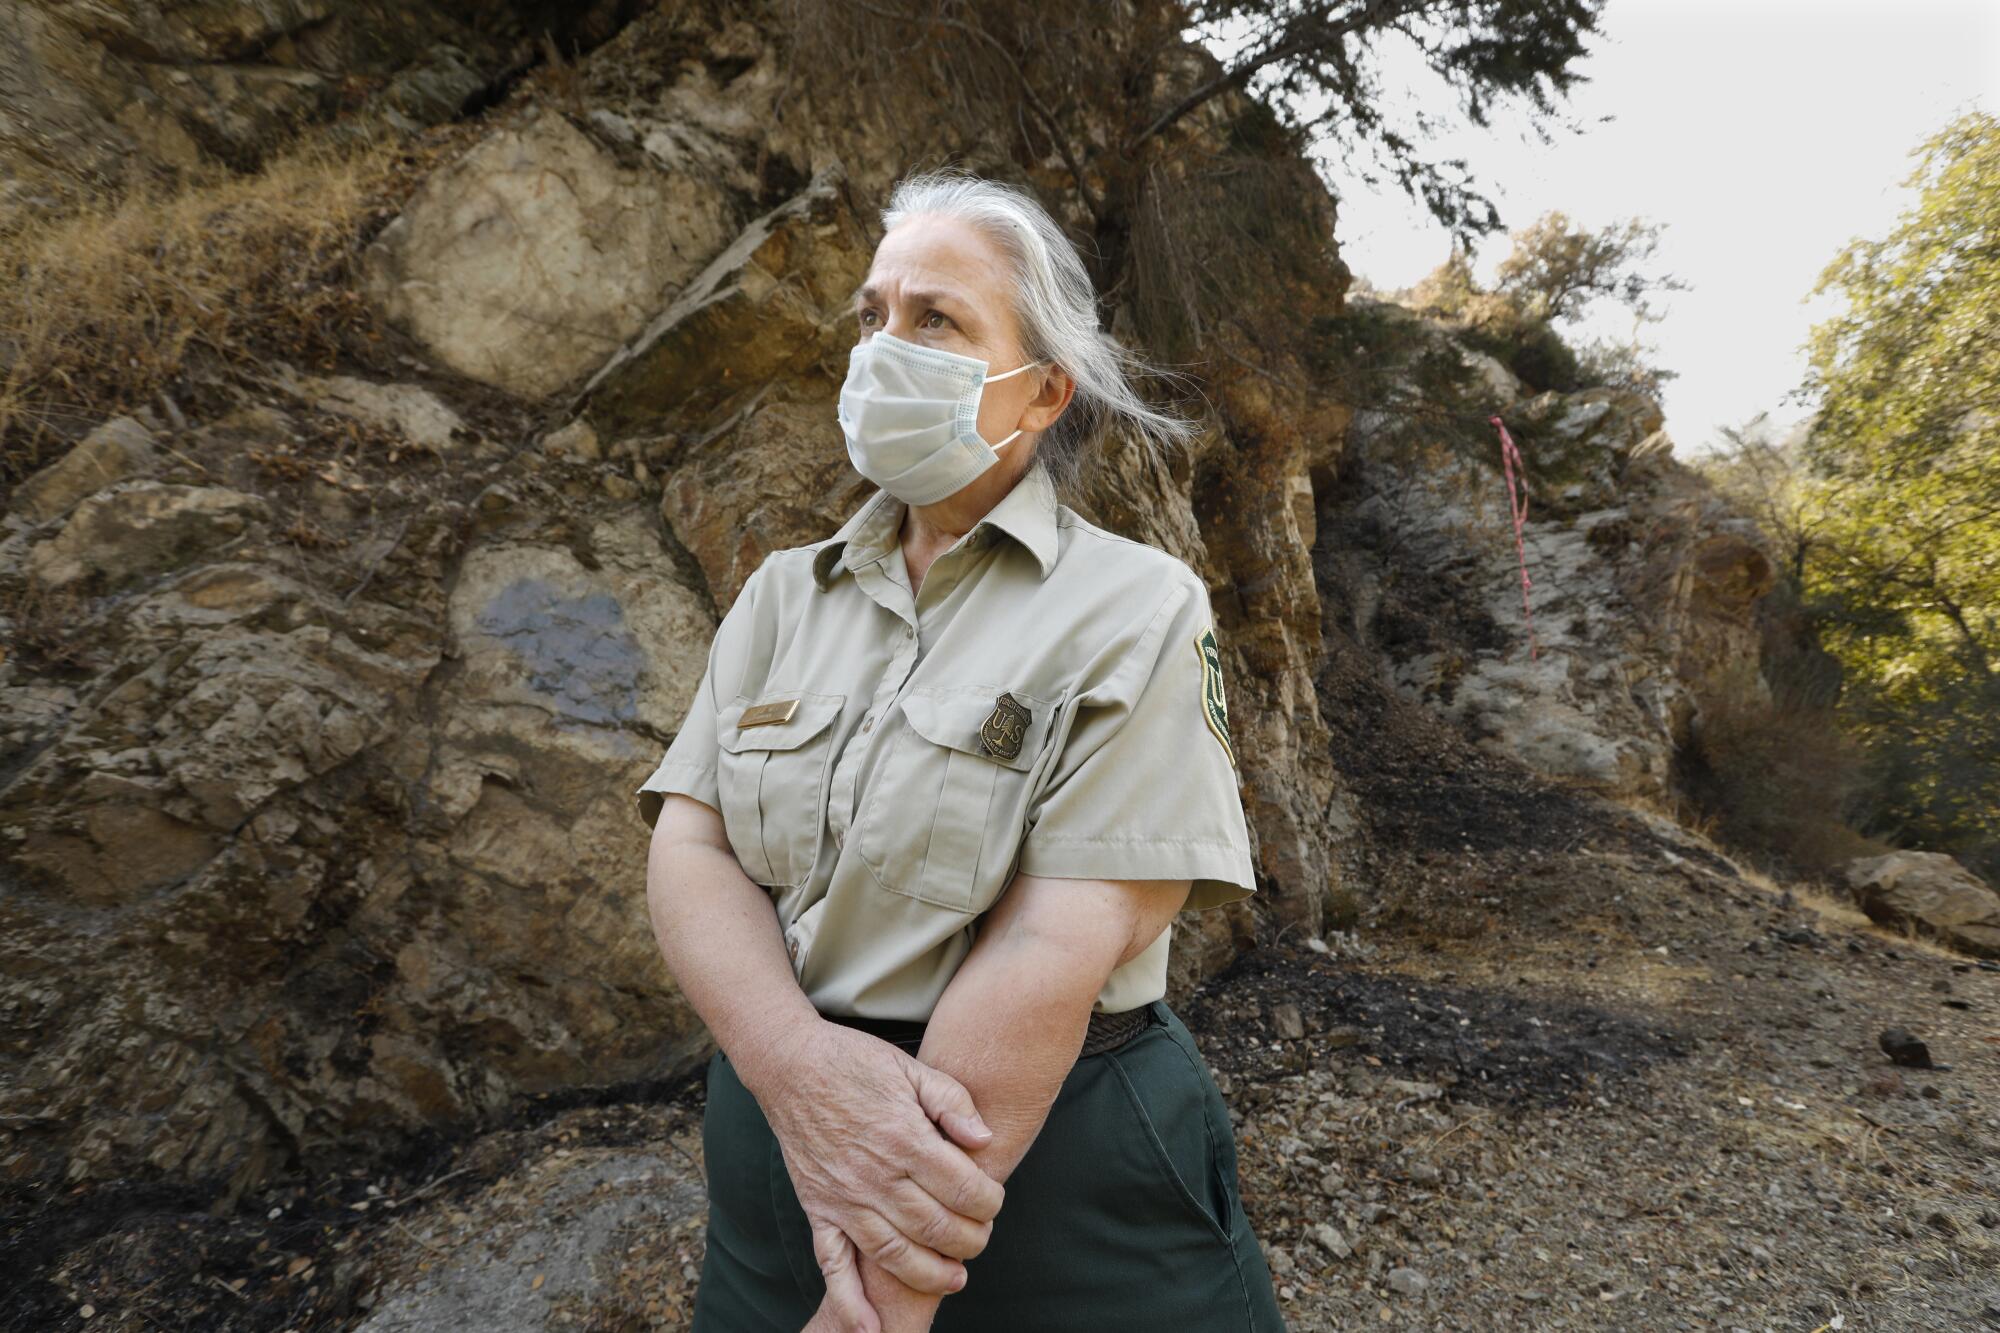 U.S. Forest Service biologist Leslie Welch surveys damage from the Bobcat fire in the San Gabriel Mountains